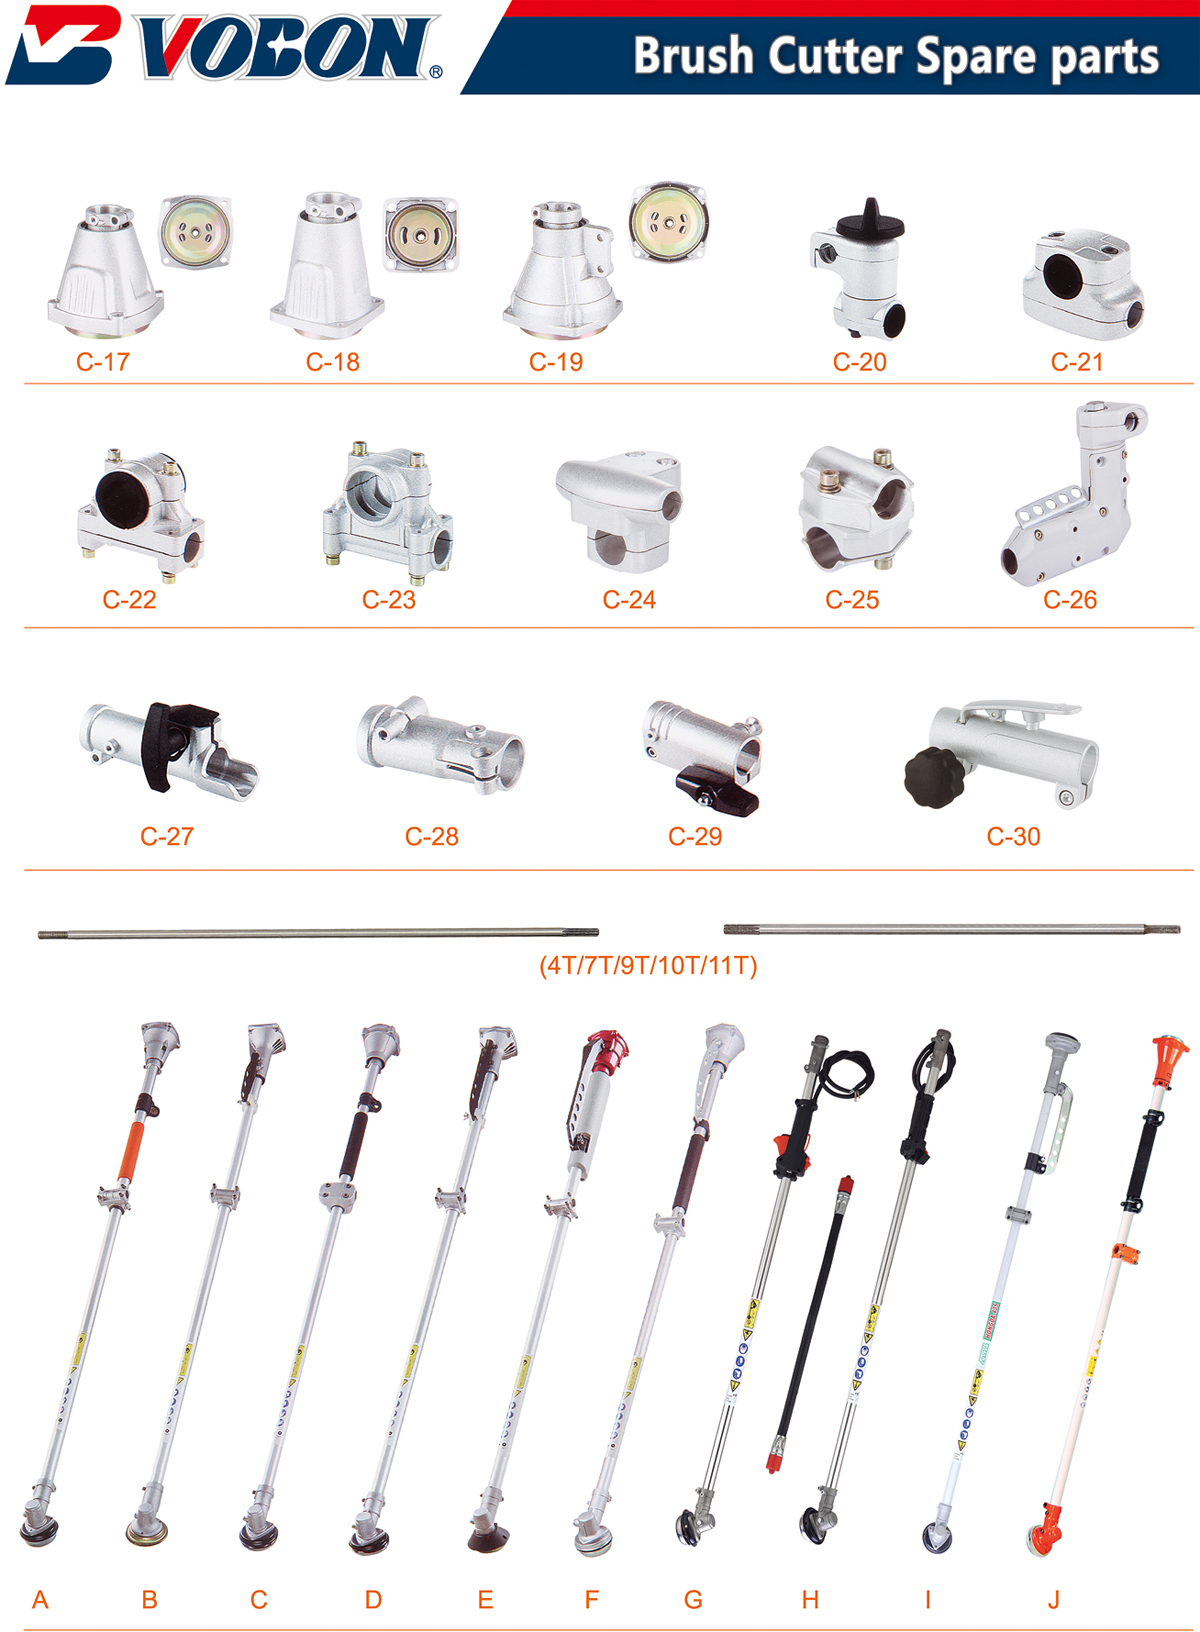 Brush Cutter Spare parts